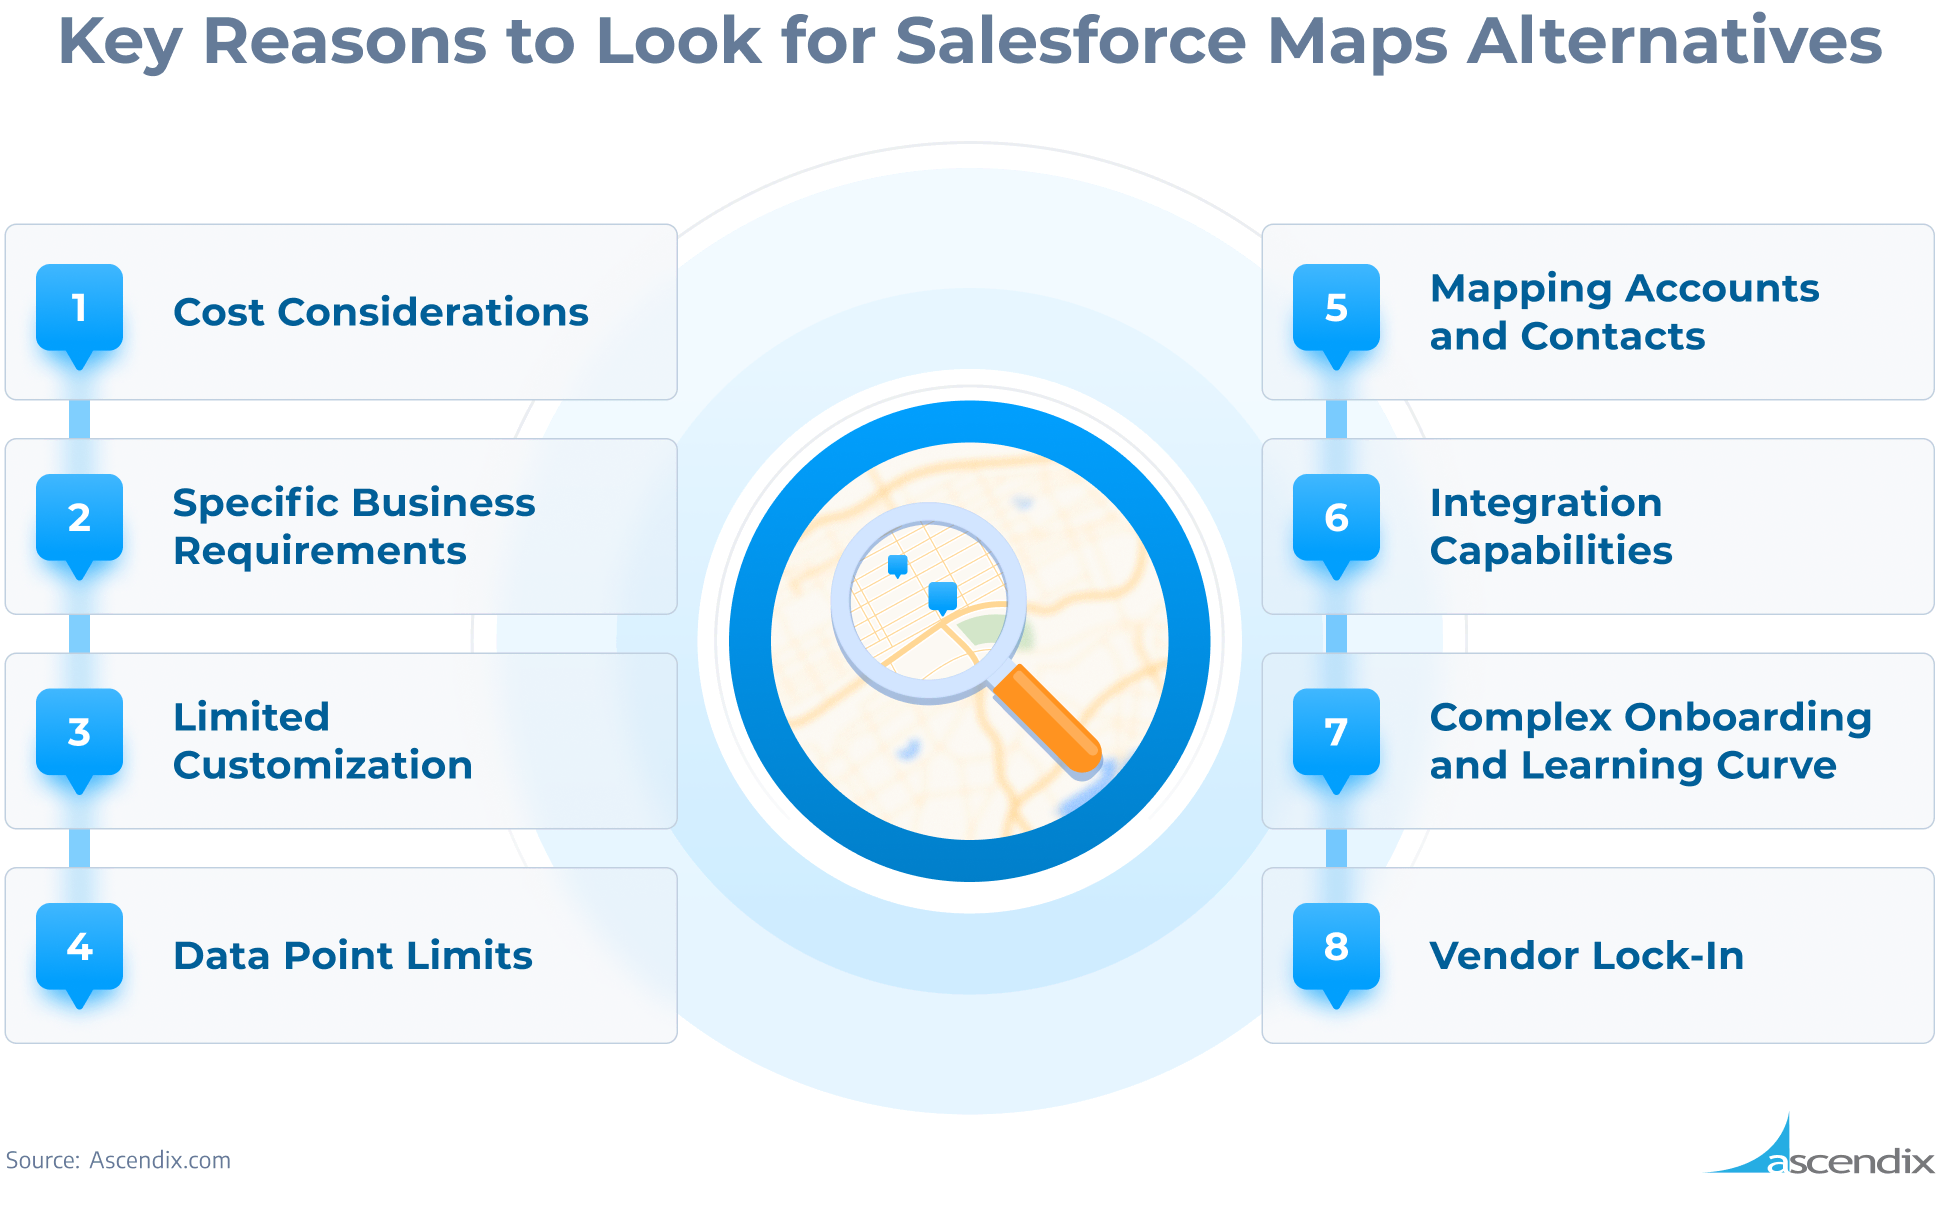 Key Reasons to Look for Salesforce Maps Alternatives